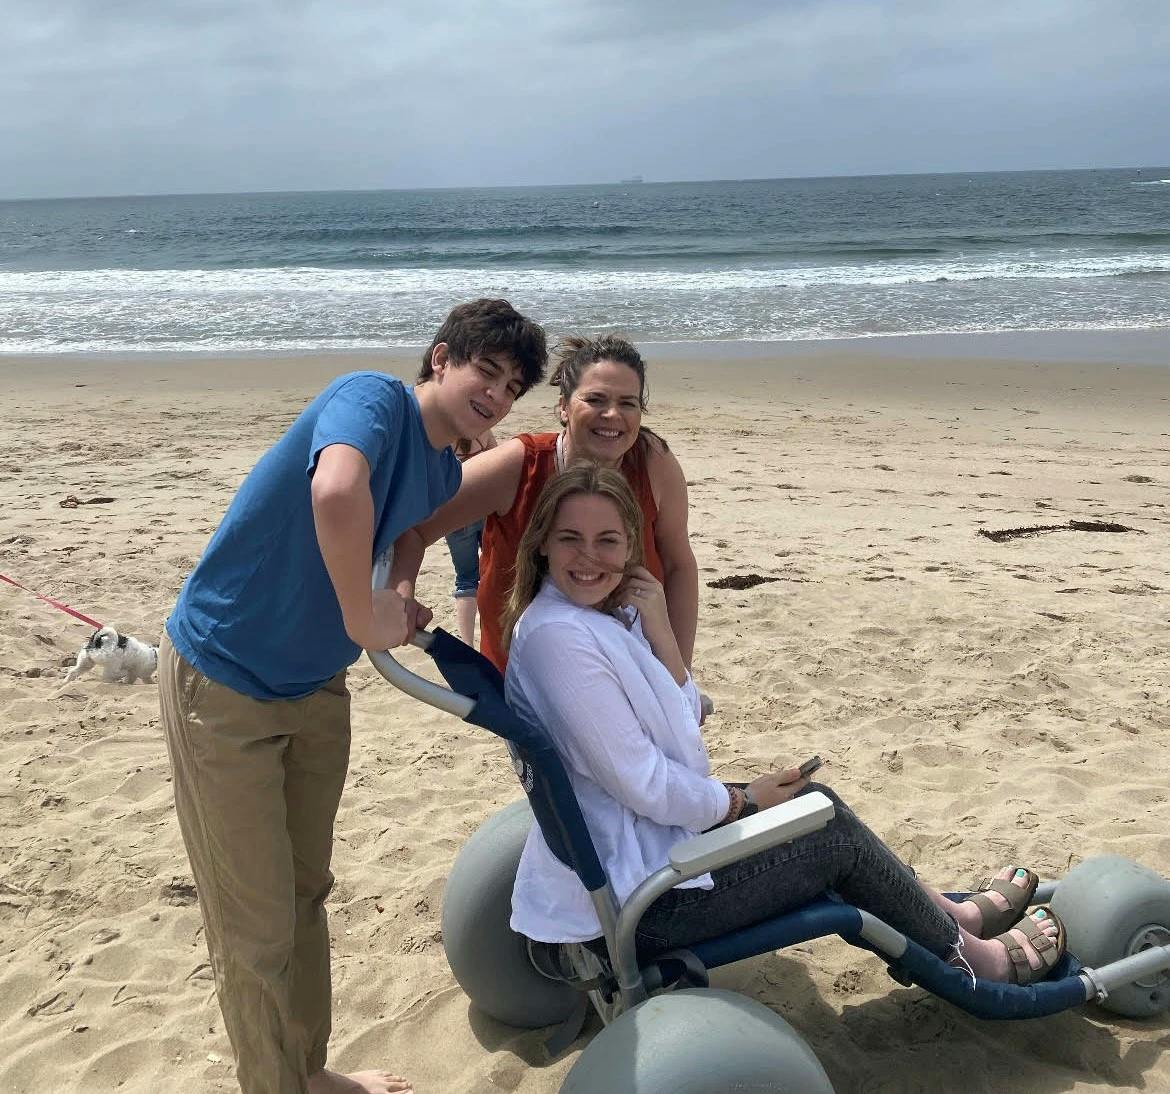 Julianna with her mom and brother at the beach.